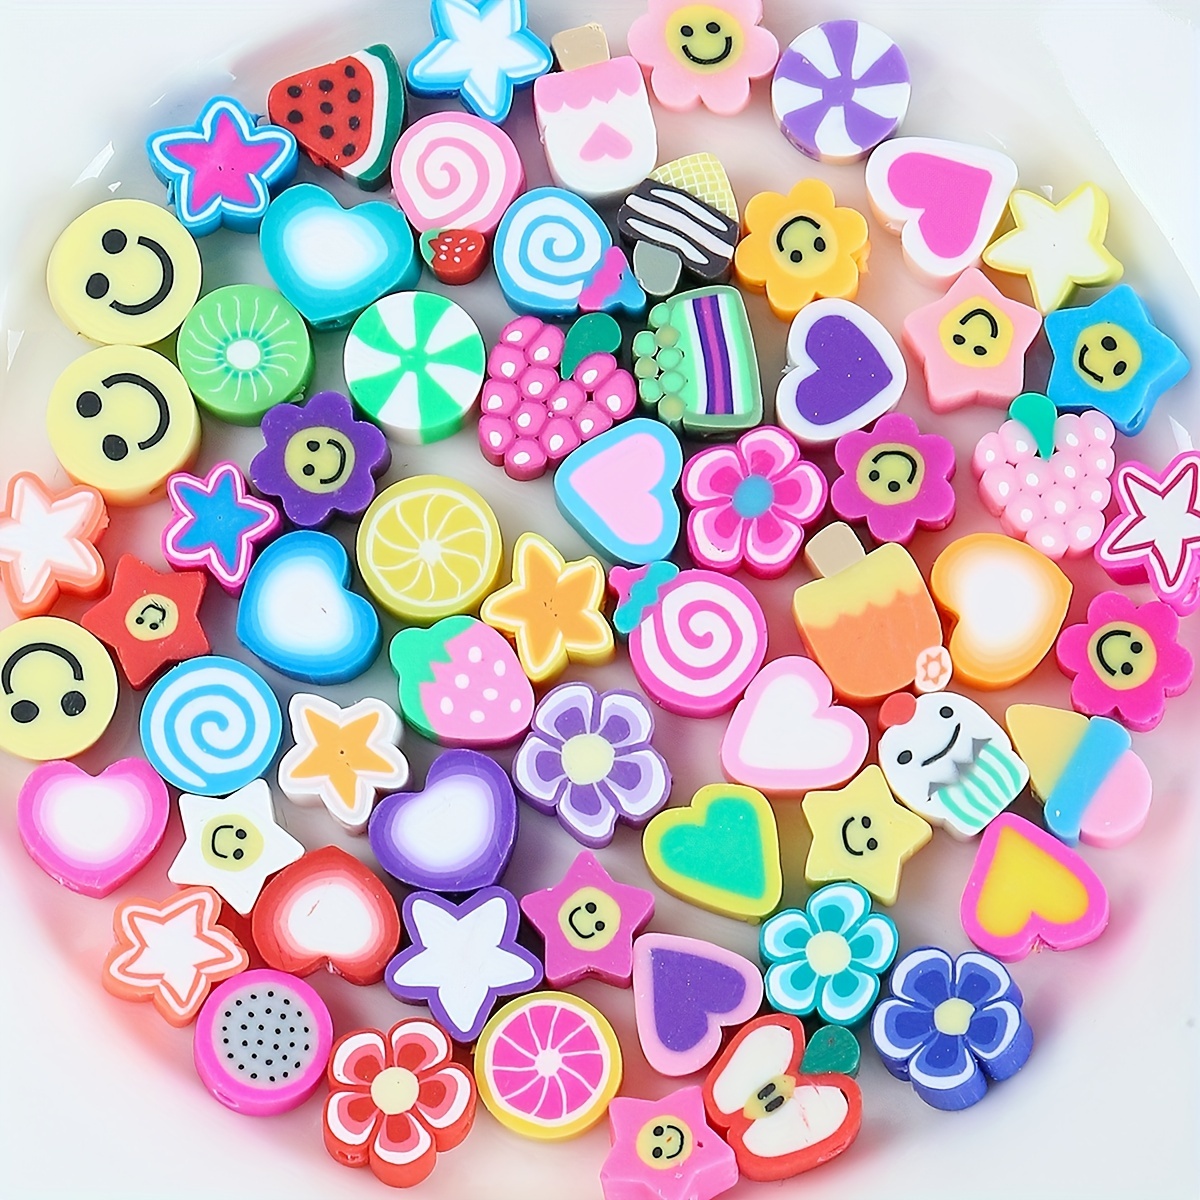 1140 Pcs Polymer Clay Bead Kit, Flower Beads Mixed Fruit Spacer  Beads,Charms For Bracelet Making